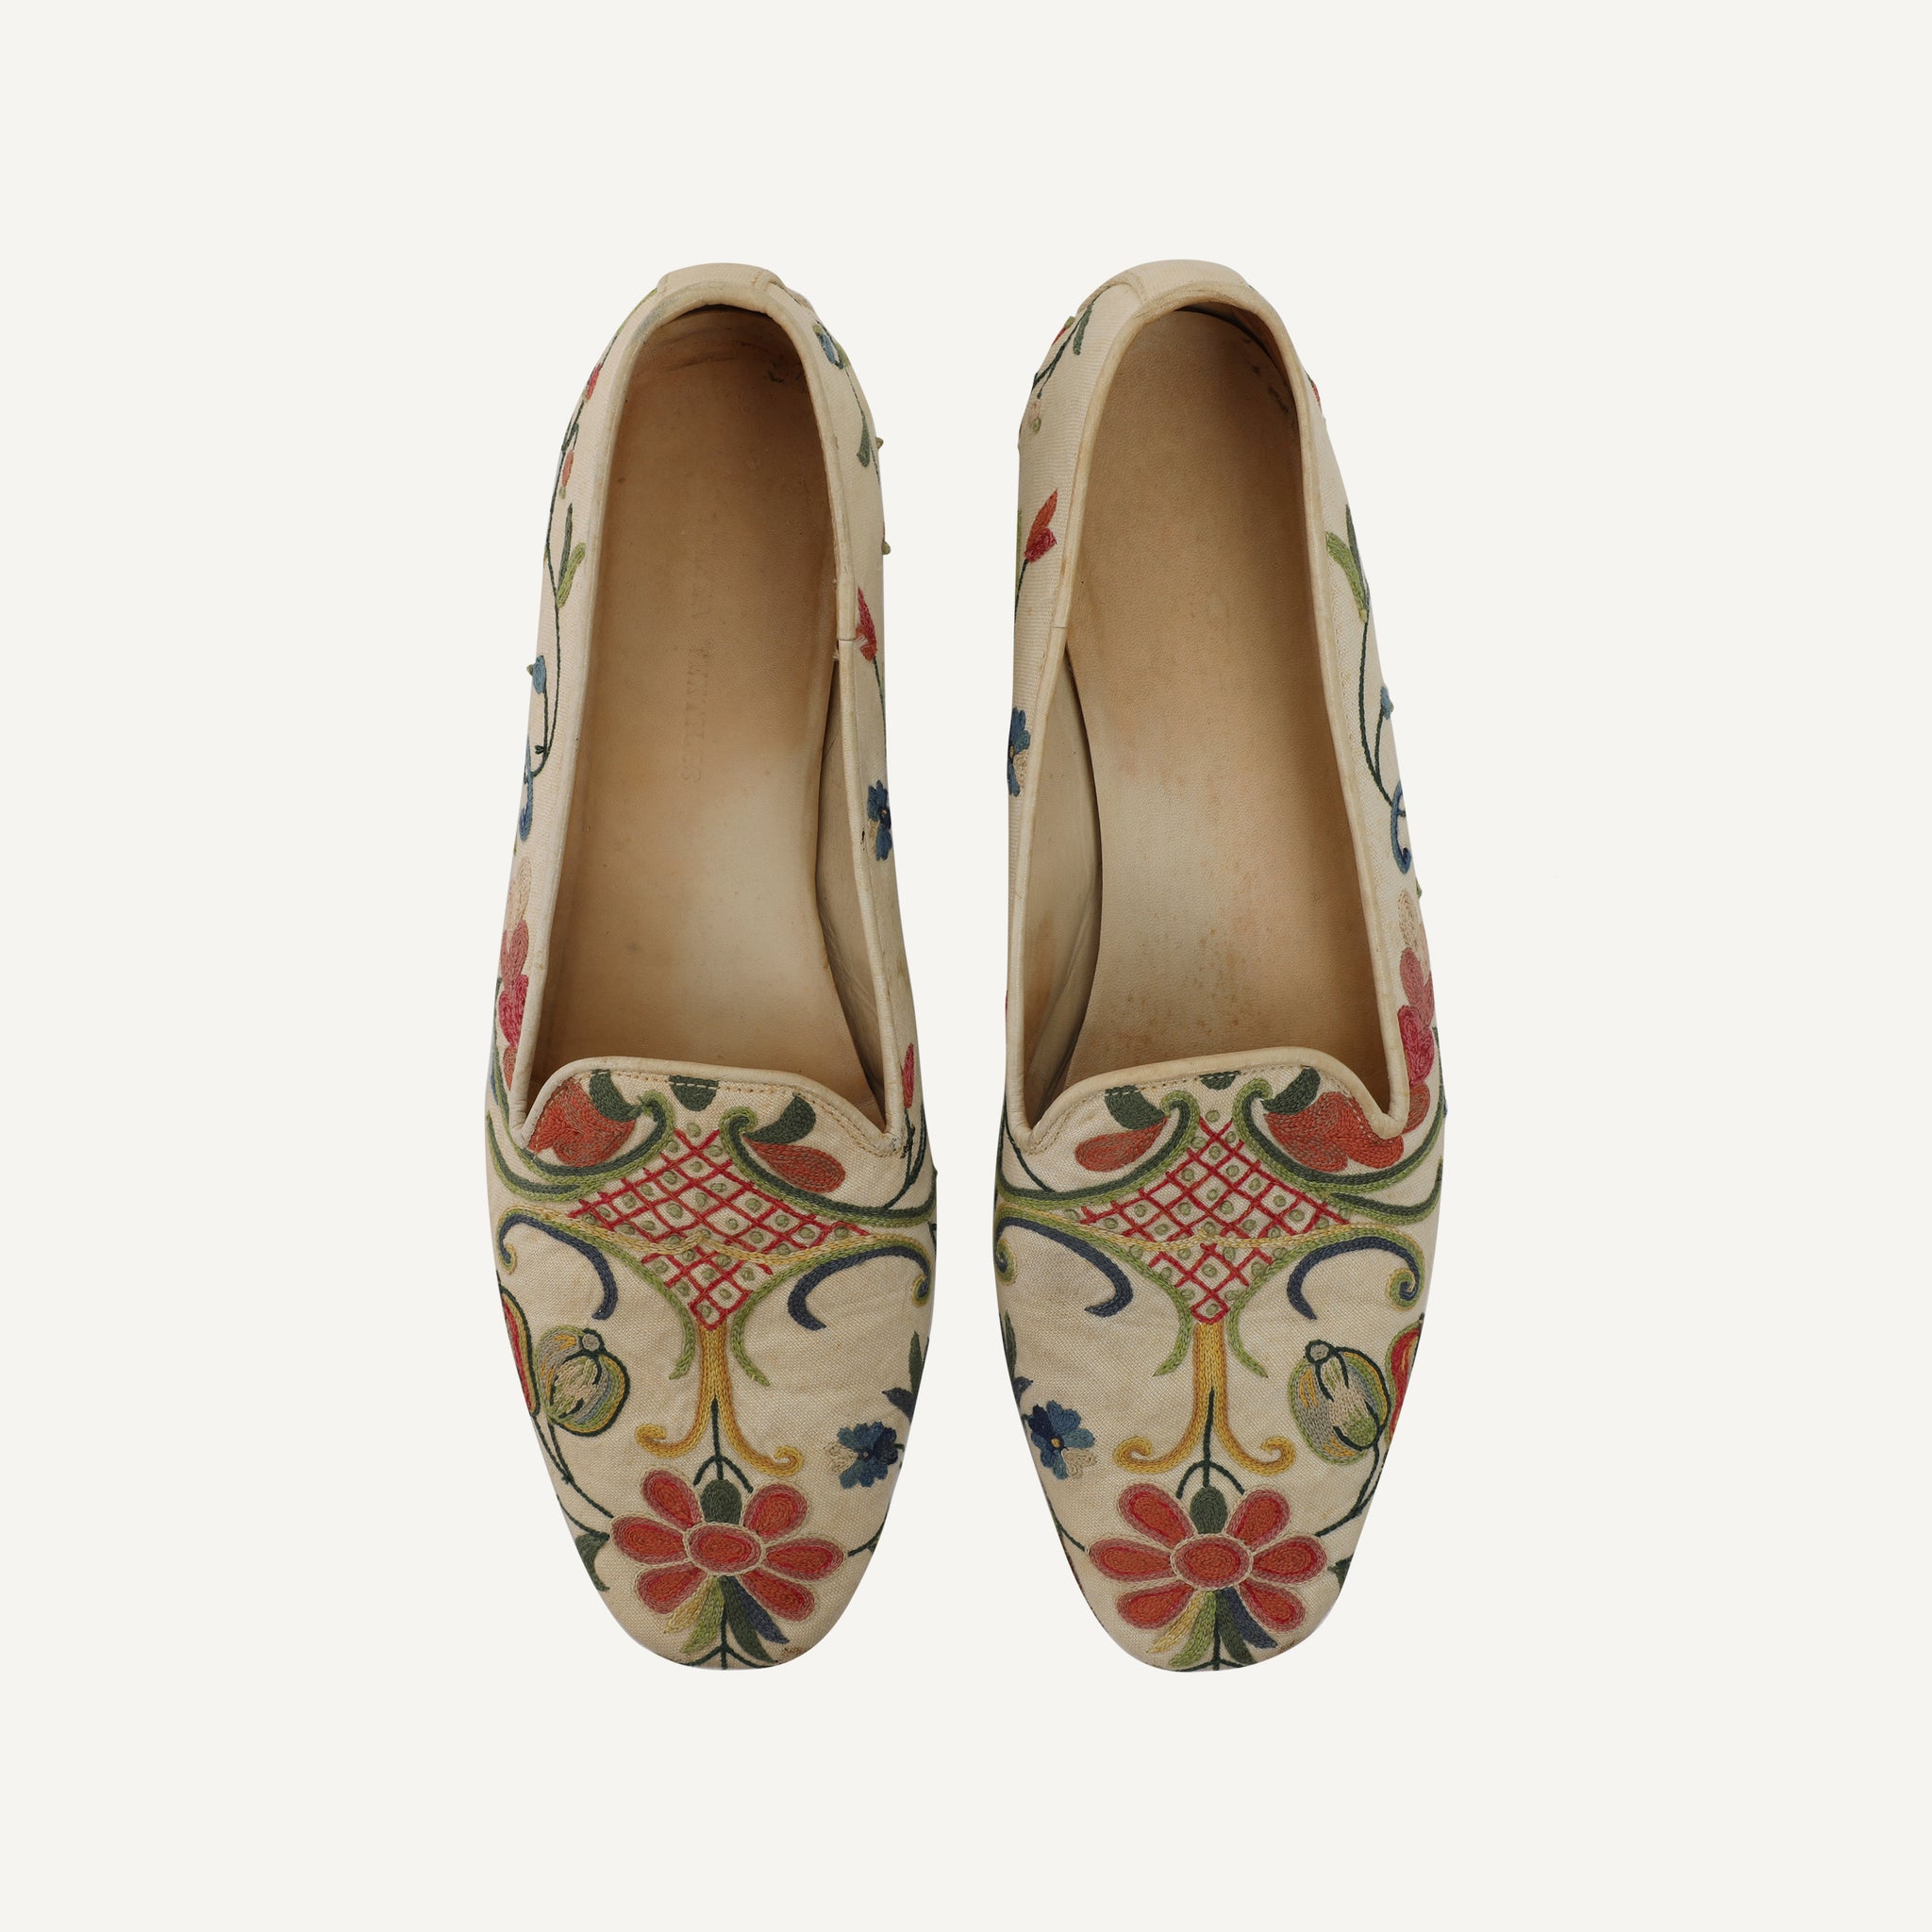 VINTAGE EMBROIDERED SLIPPERS